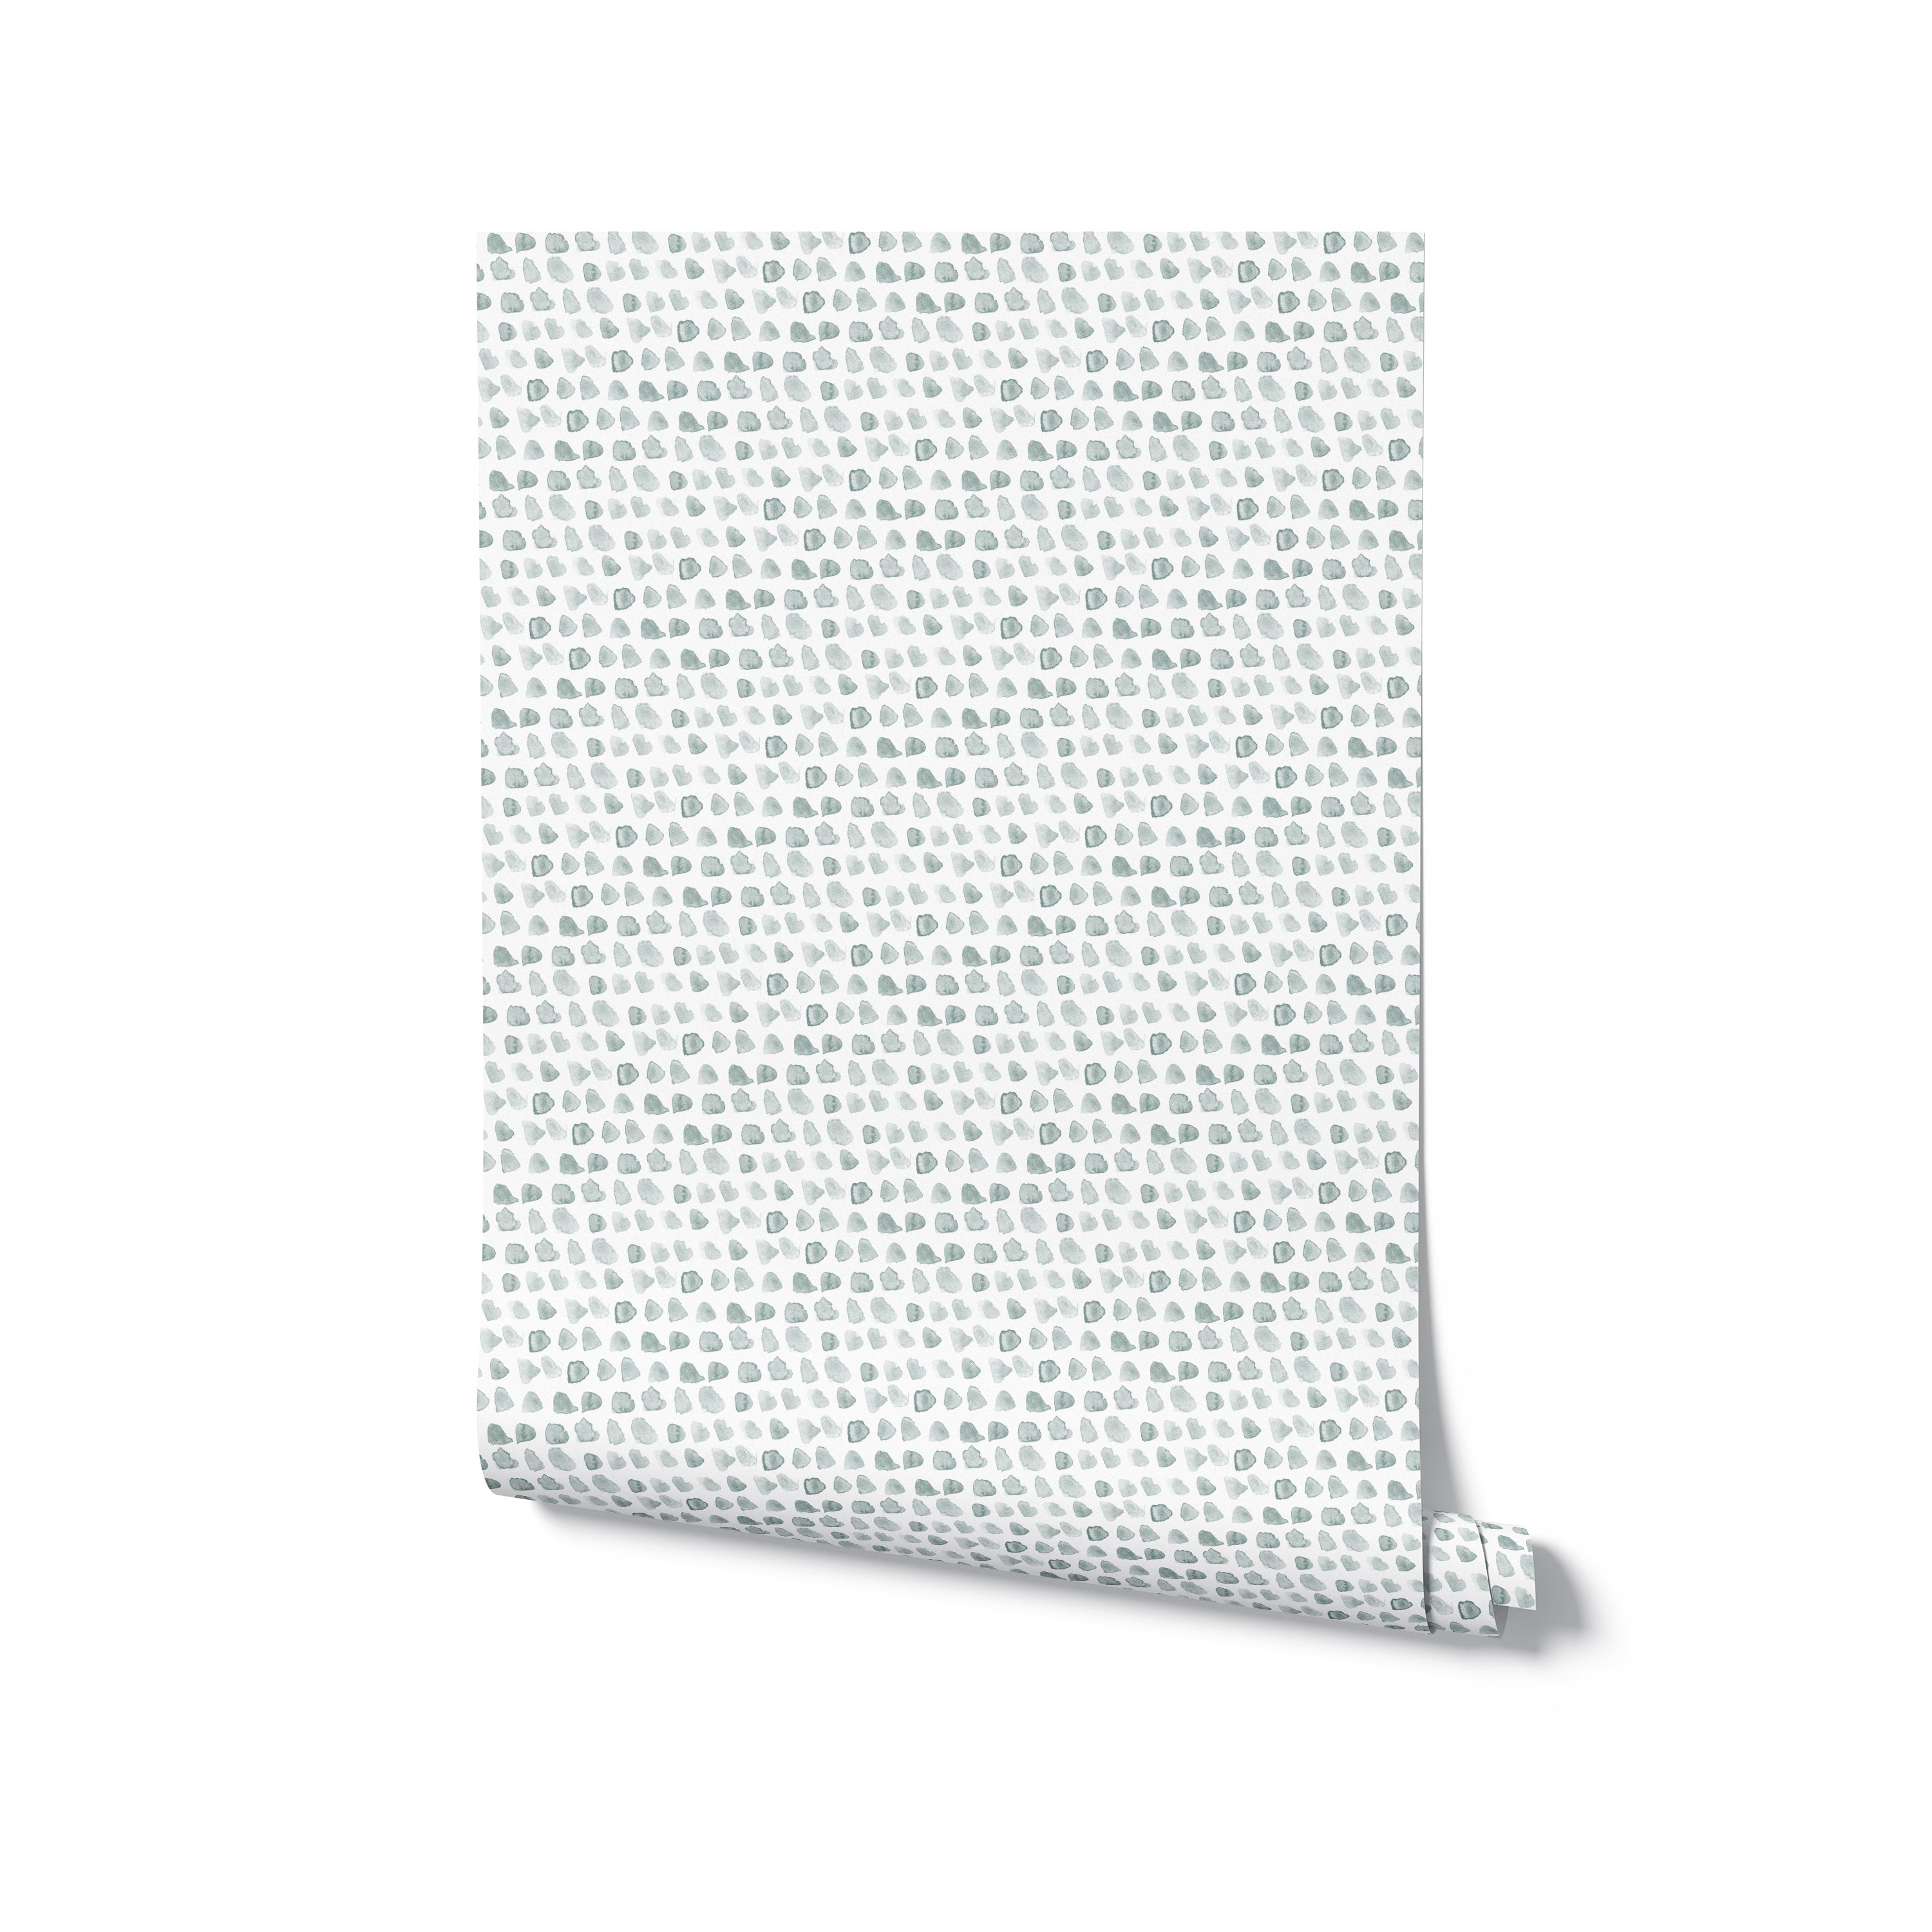 A realistic mockup of the Handpainted Dots Wallpaper rolled up and standing against a white background. The wallpaper features a delicate pattern of painted dots on a sage surface, illustrating the wallpaper's texture and color as it would appear when applied to a wall.